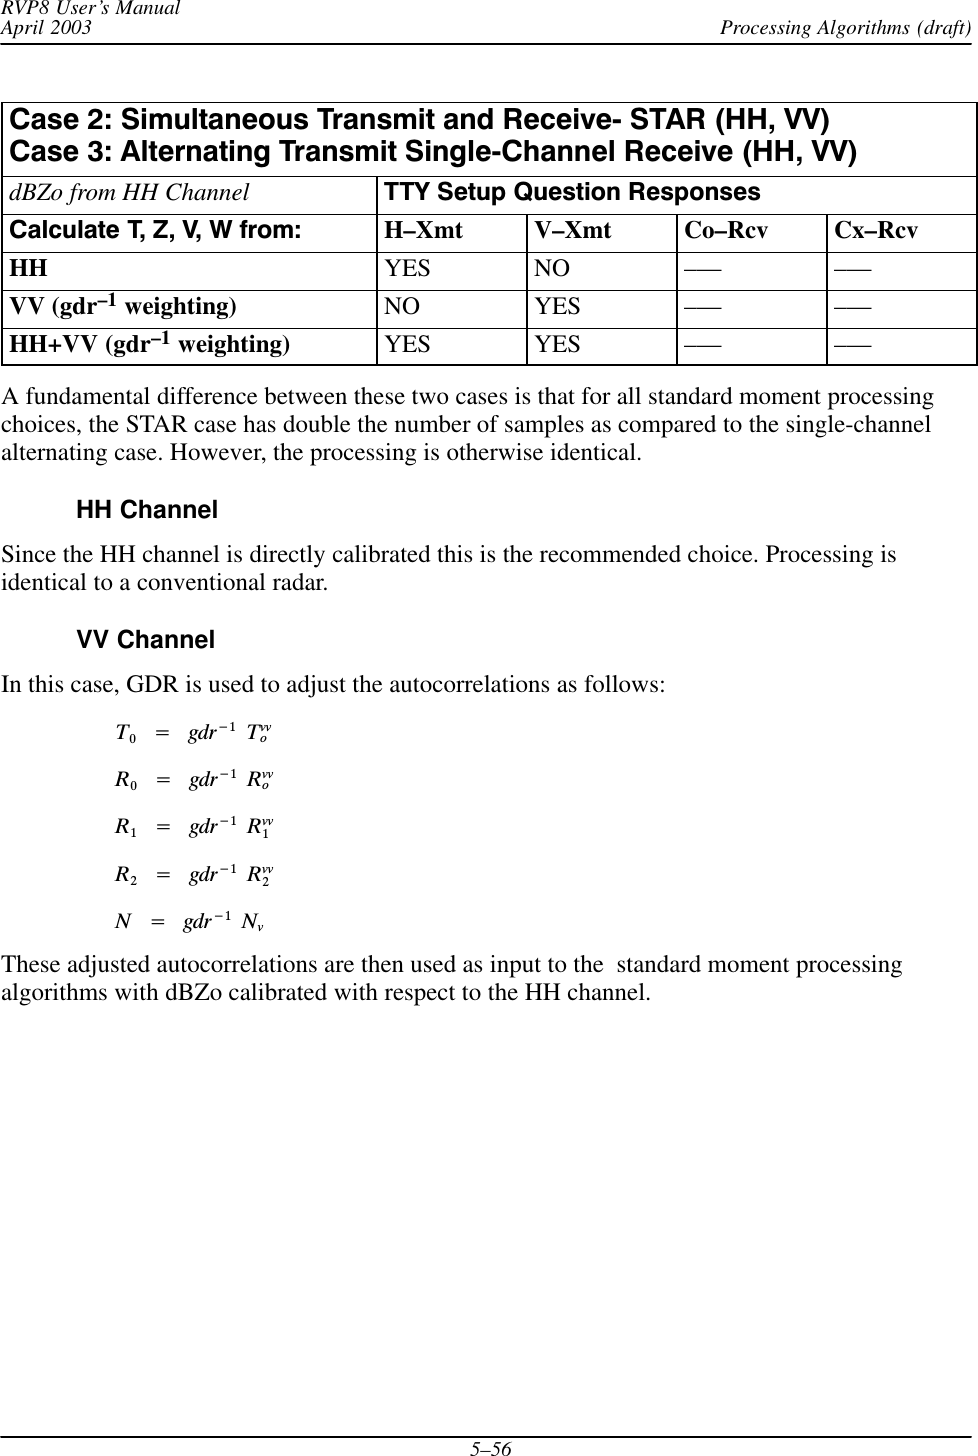 Processing Algorithms (draft)RVP8 User’s ManualApril 20035–56Case 2: Simultaneous Transmit and ReceiveĆ STAR (HH, VV)Case 3: Alternating Transmit SingleĆChannel Receive (HH, VV)dBZo from HH Channel TTY Setup Question ResponsesCalculate T, Z, V, W from: H–Xmt V–Xmt Co–Rcv Cx–RcvHH YES NO ––– –––VV (gdr–1 weighting) NO YES ––– –––HH+VV (gdr–1 weighting) YES YES ––– –––A fundamental difference between these two cases is that for all standard moment processingchoices, the STAR case has double the number of samples as compared to the single-channelalternating case. However, the processing is otherwise identical.HH ChannelSince the HH channel is directly calibrated this is the recommended choice. Processing isidentical to a conventional radar.VV ChannelIn this case, GDR is used to adjust the autocorrelations as follows:T0Ą+Ągdr*1ĄTvvoR0Ą+Ągdr*1ĄRvvoR1Ą+Ągdr*1ĄRvv1R2Ą+Ągdr*1ĄRvv2NĄ+Ągdr*1ĄNvThese adjusted autocorrelations are then used as input to the  standard moment processingalgorithms with dBZo calibrated with respect to the HH channel.